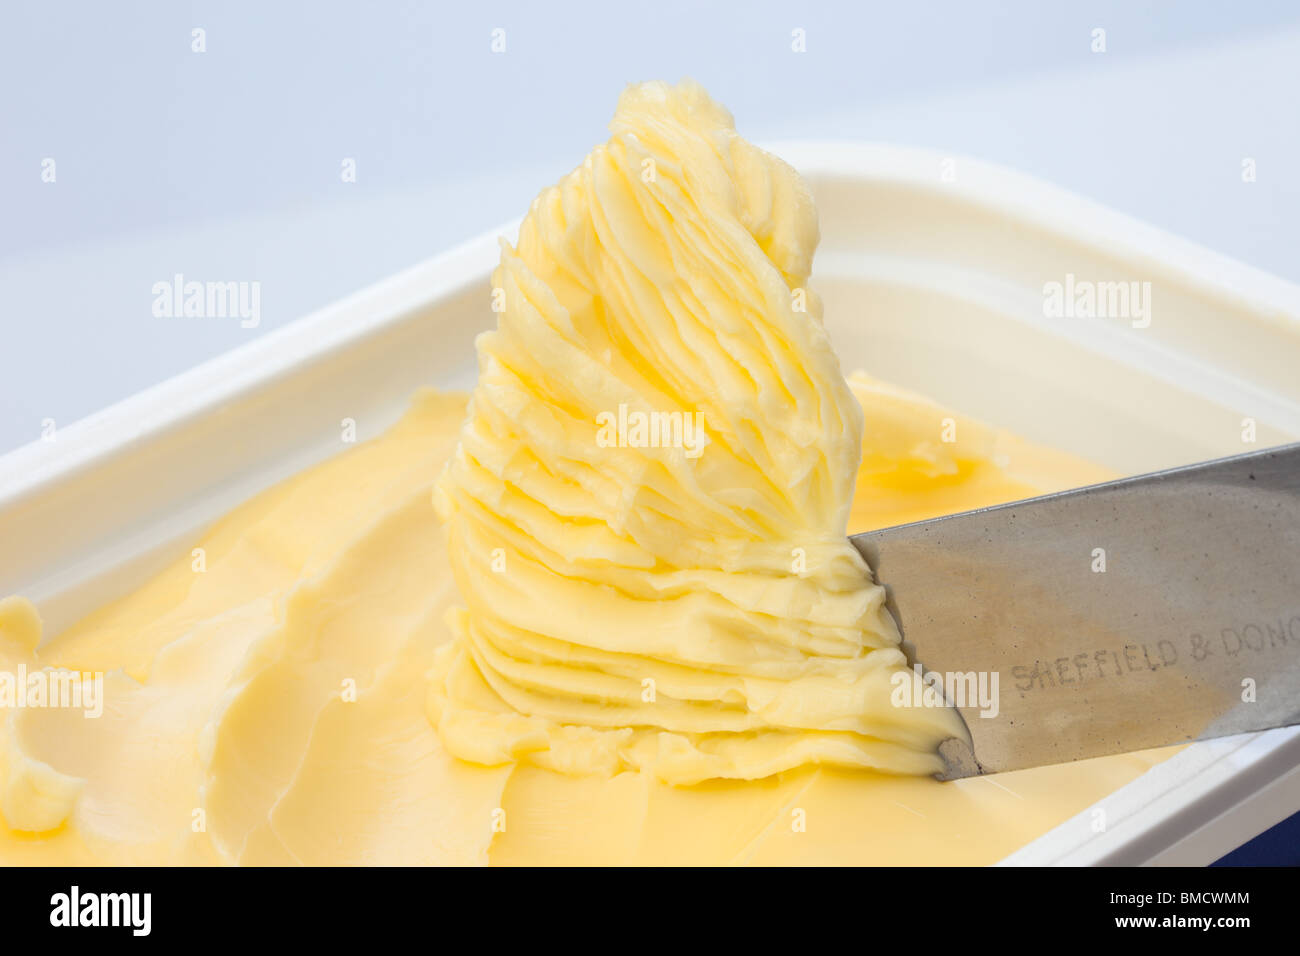 Knife scooping up spreadable dairy spread in a plastic tub container Stock Photo